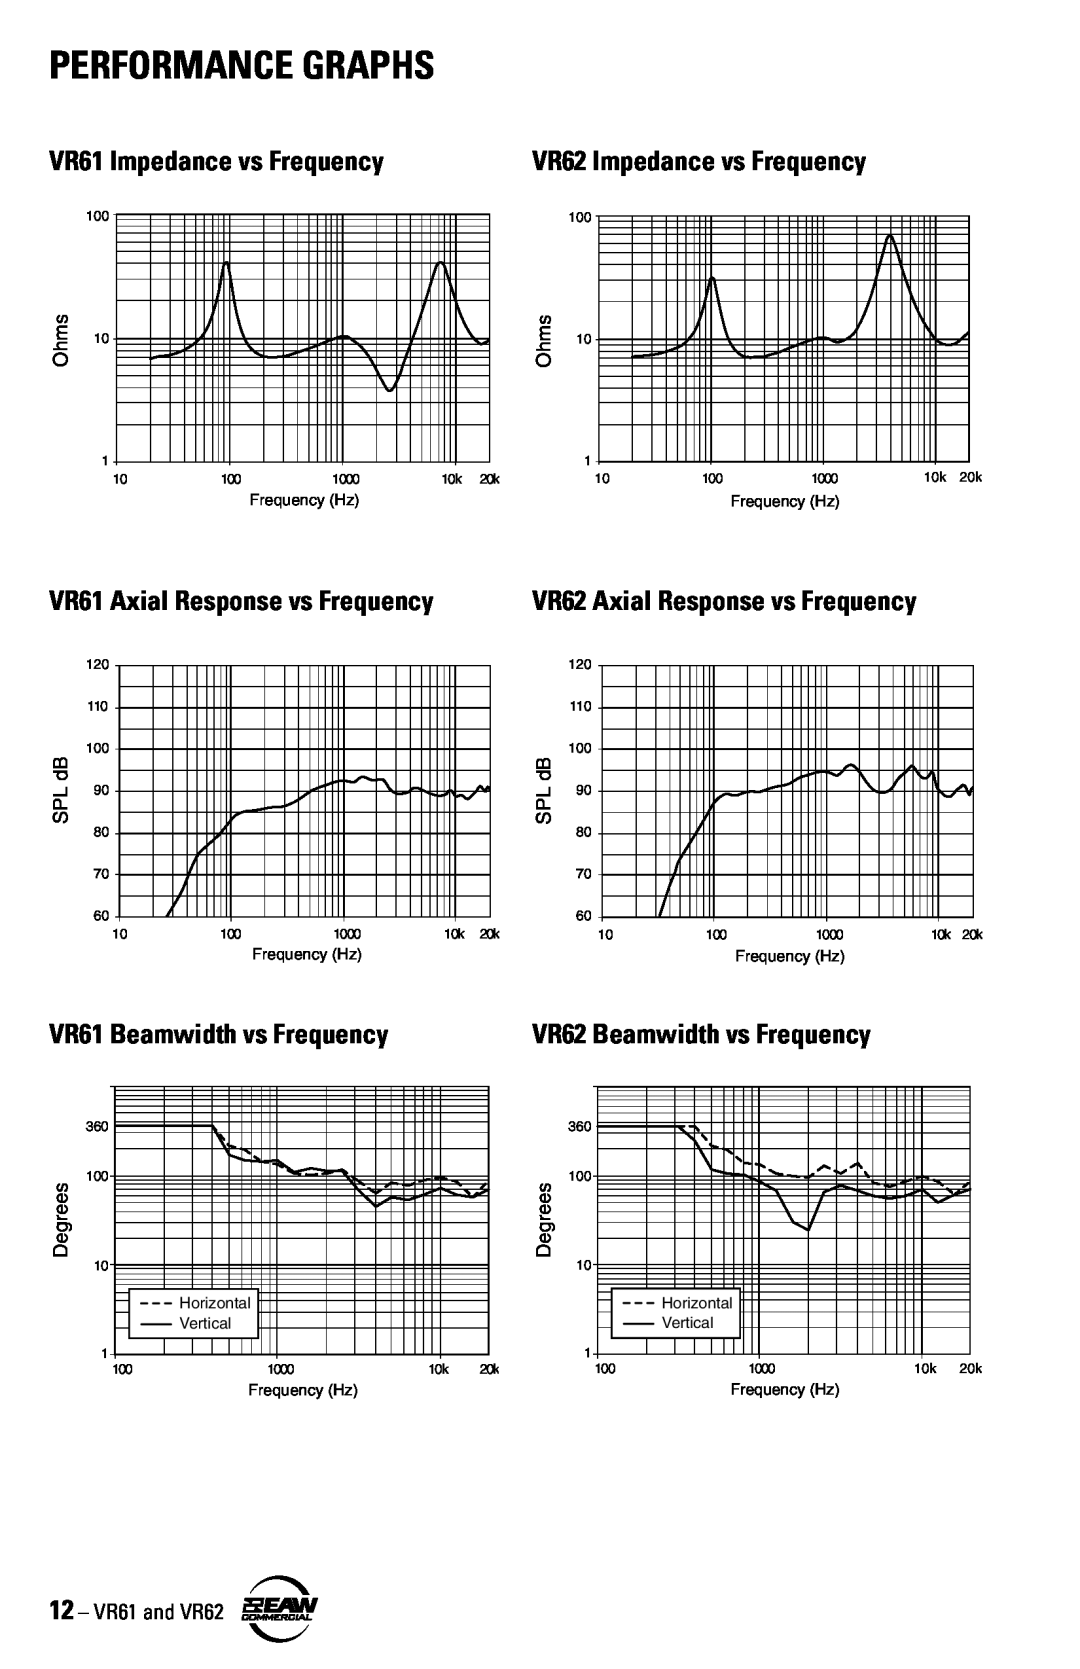 Kenwood VR61 Impedance vs Frequency, VR61 Axial Response vs Frequency, VR61 Beamwidth vs Frequency, Performance Graphs 